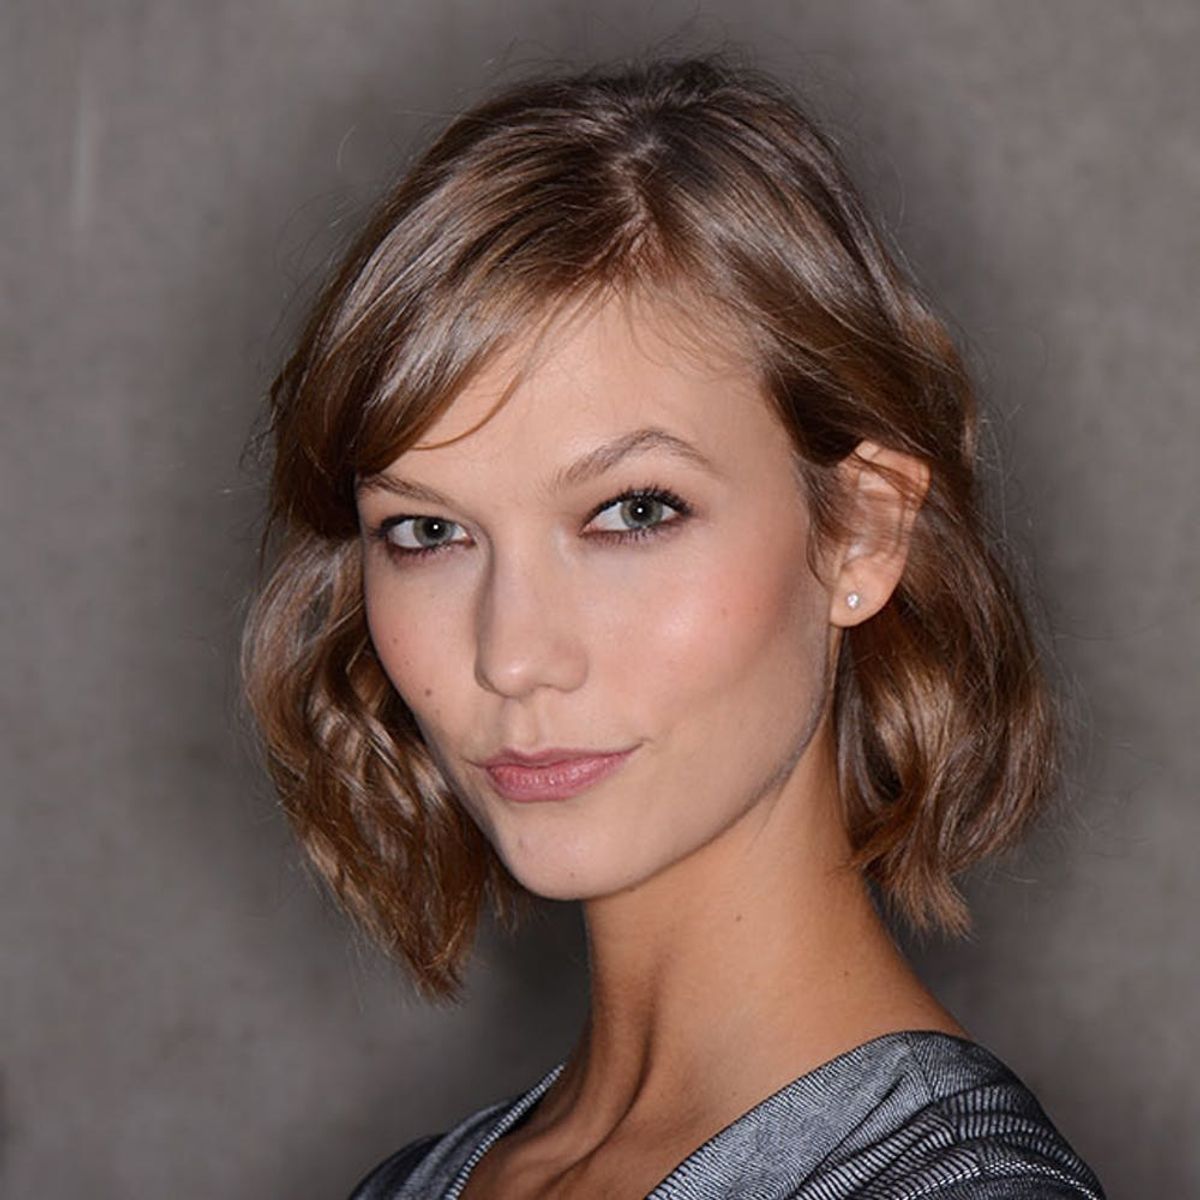 Tall Girls, Karlie Kloss Just Designed Your New Favorite Pair of Jeans